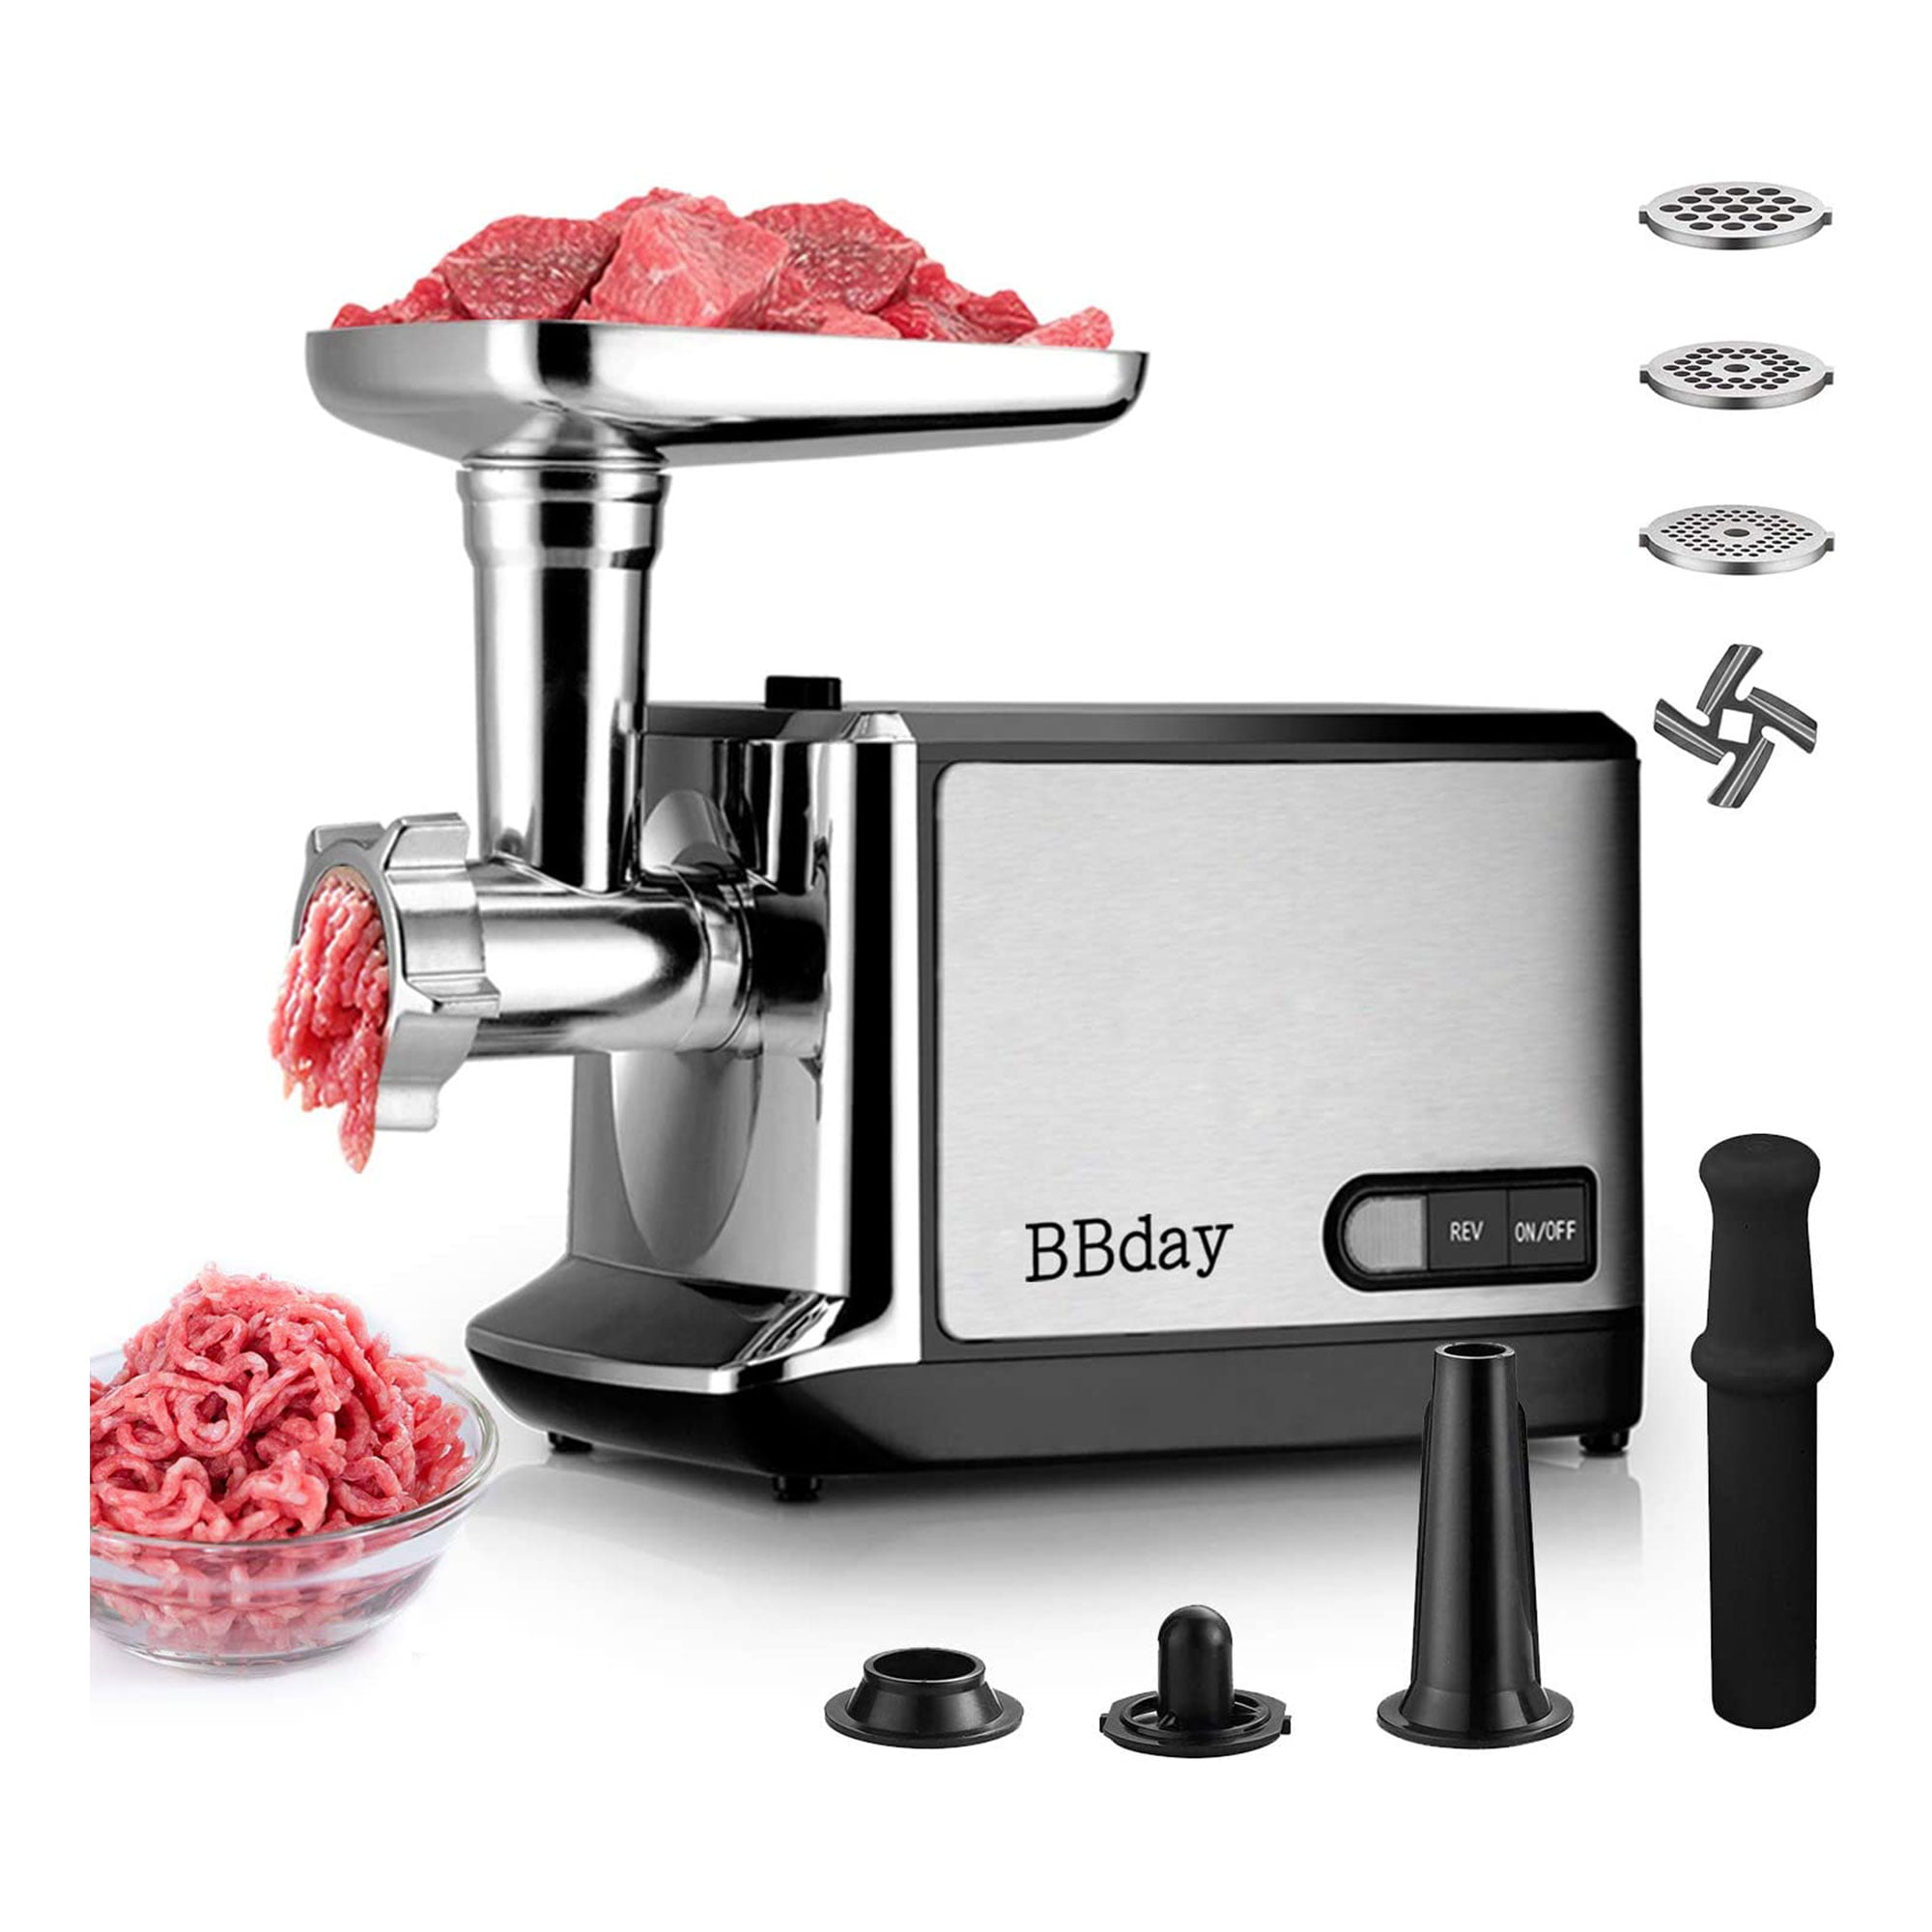 BBday Multifunction Stainless Steel Electric Meat Grinder & Sausage Stuffer  - Walmart.com